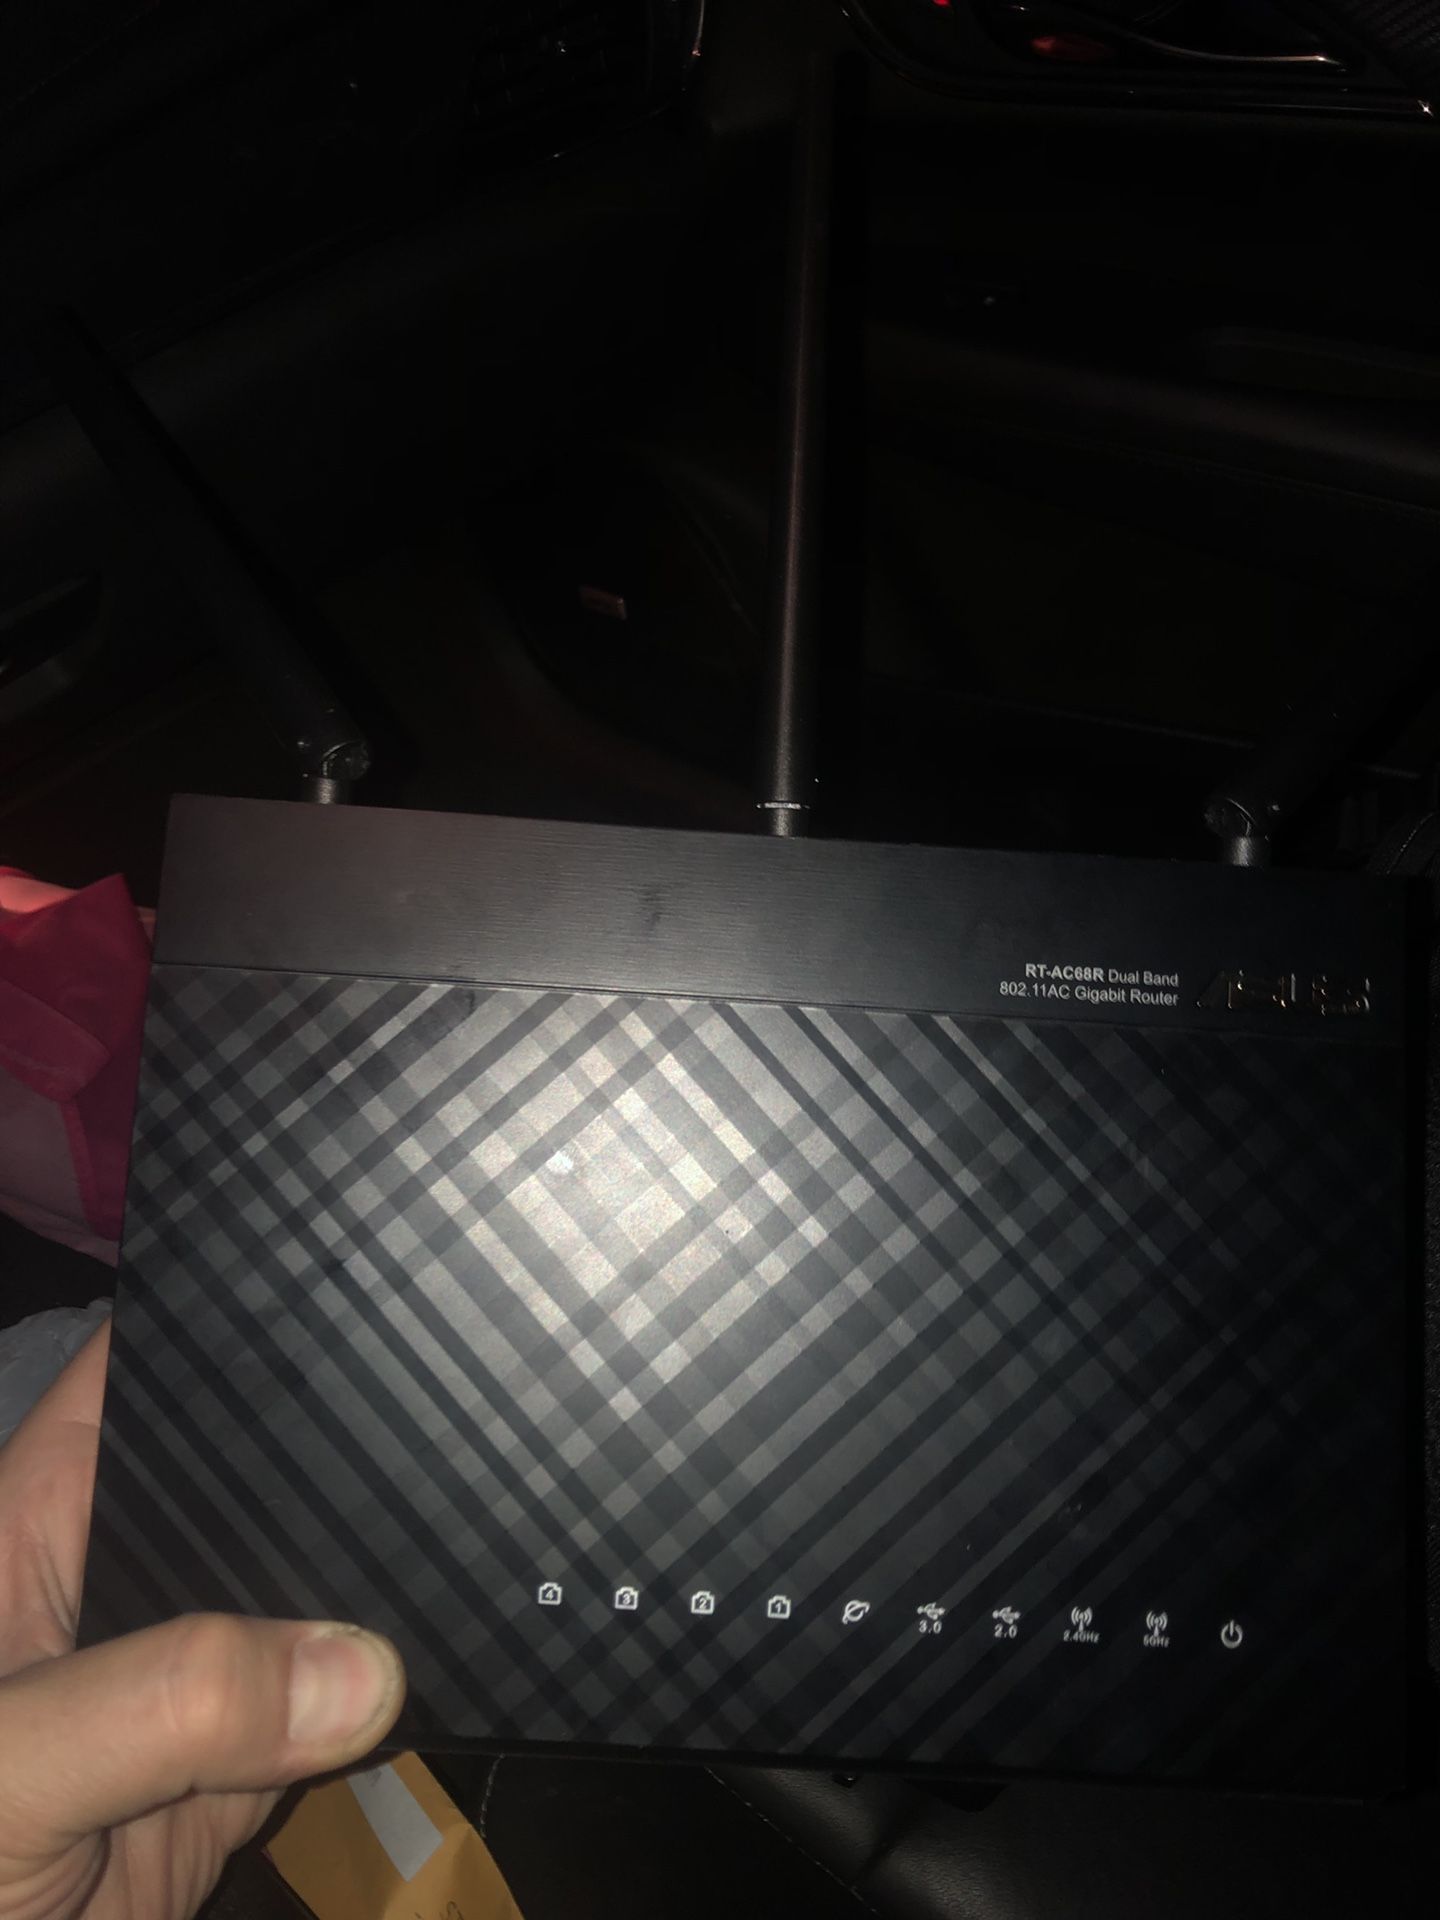 ASUS Dual Band Router — 802.11AC Gigabit Router IN PERFECT CONDITION!!!